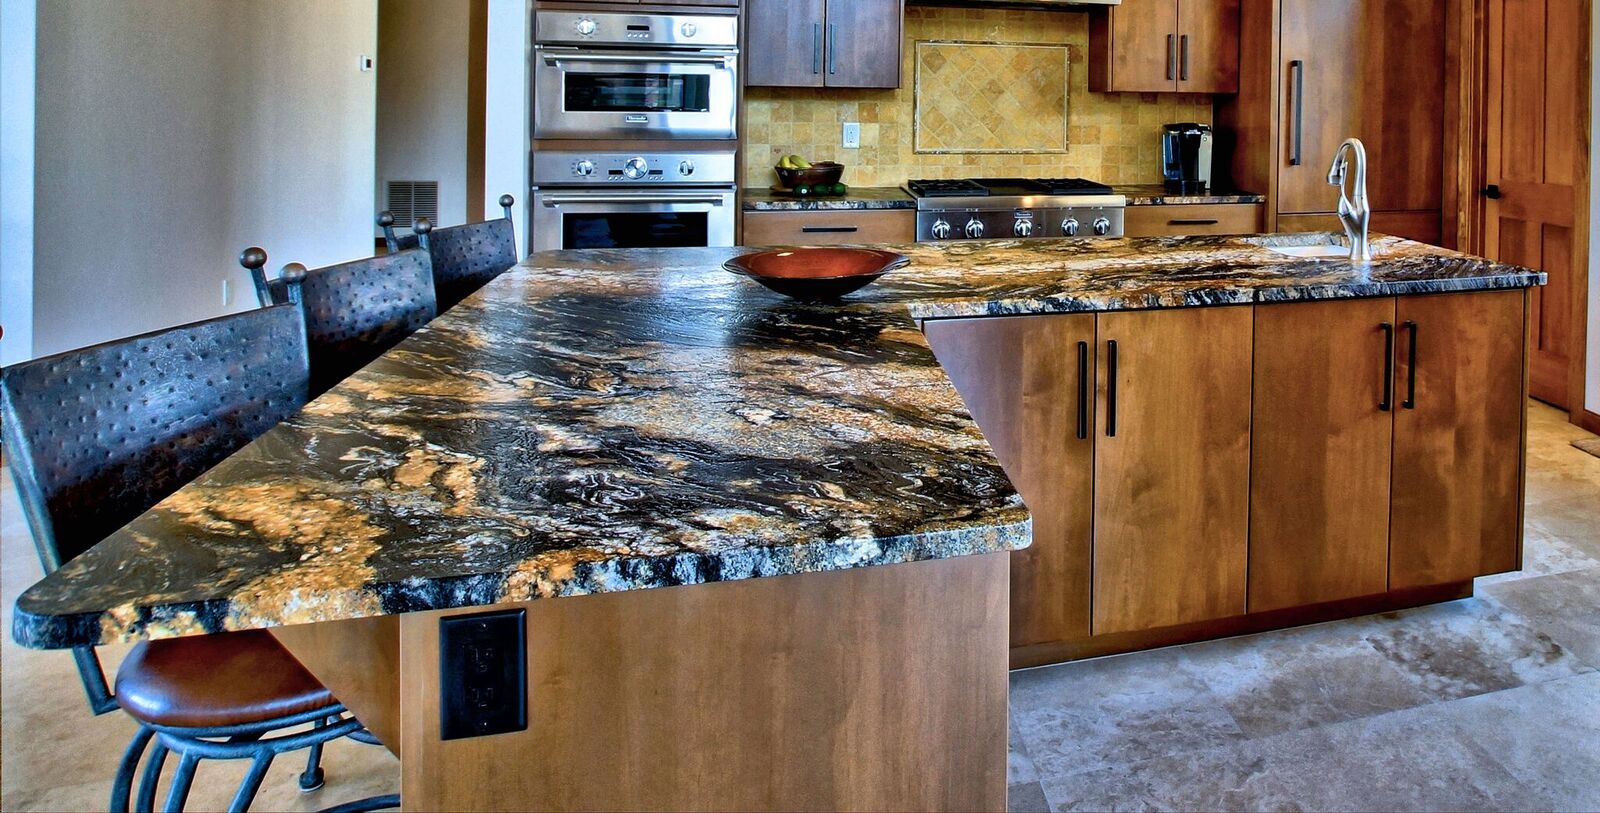 A kitchen with granite counter tops and wooden cabinets.